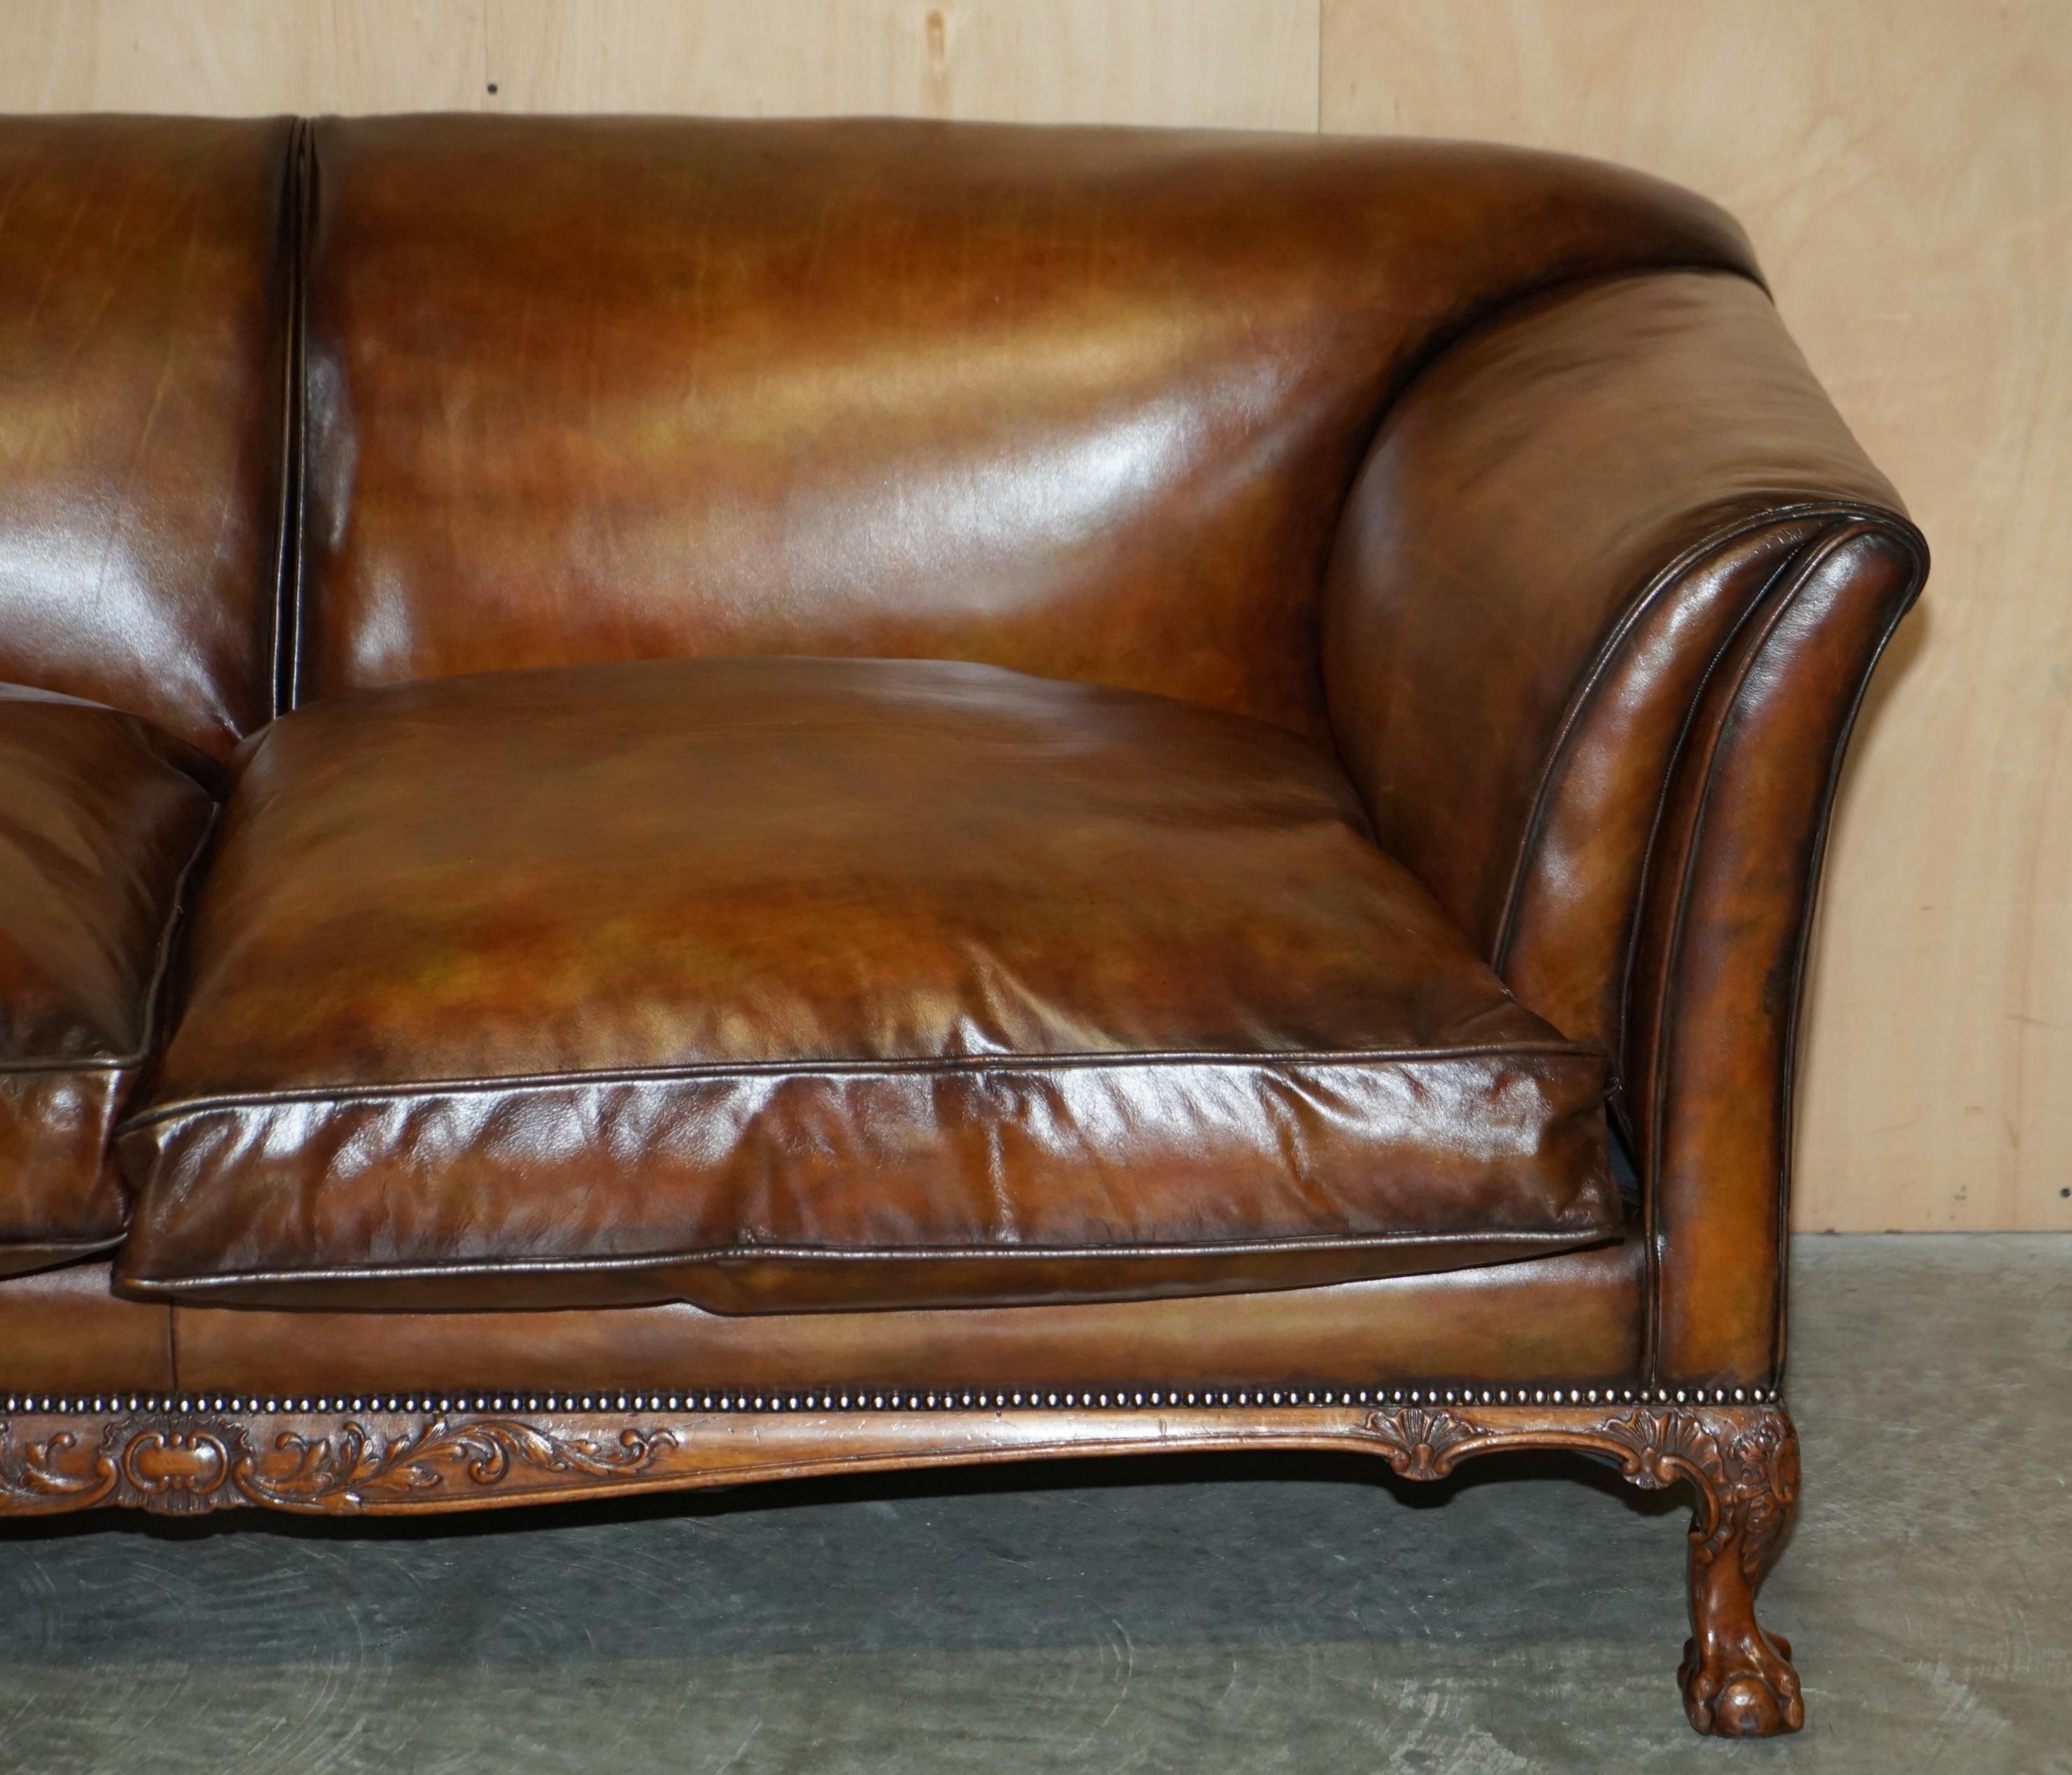 Hand-Crafted Fine Victorian Howard & Son's Claw & Ball Feet Brown Leather Chesterfield Sofa